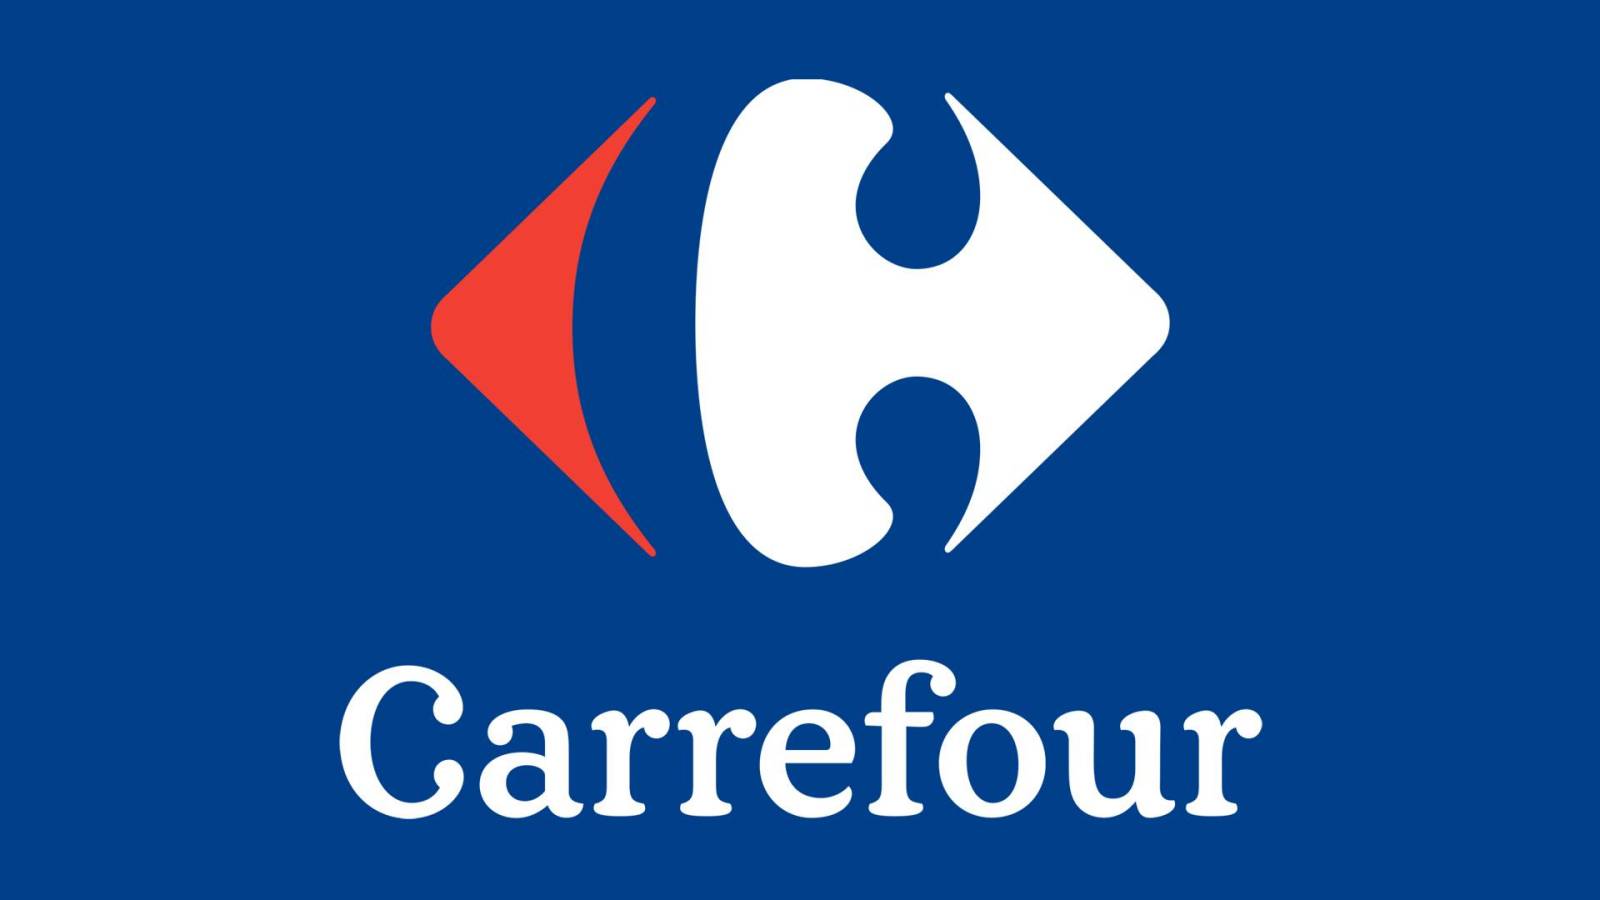 Carrefour bucatarie